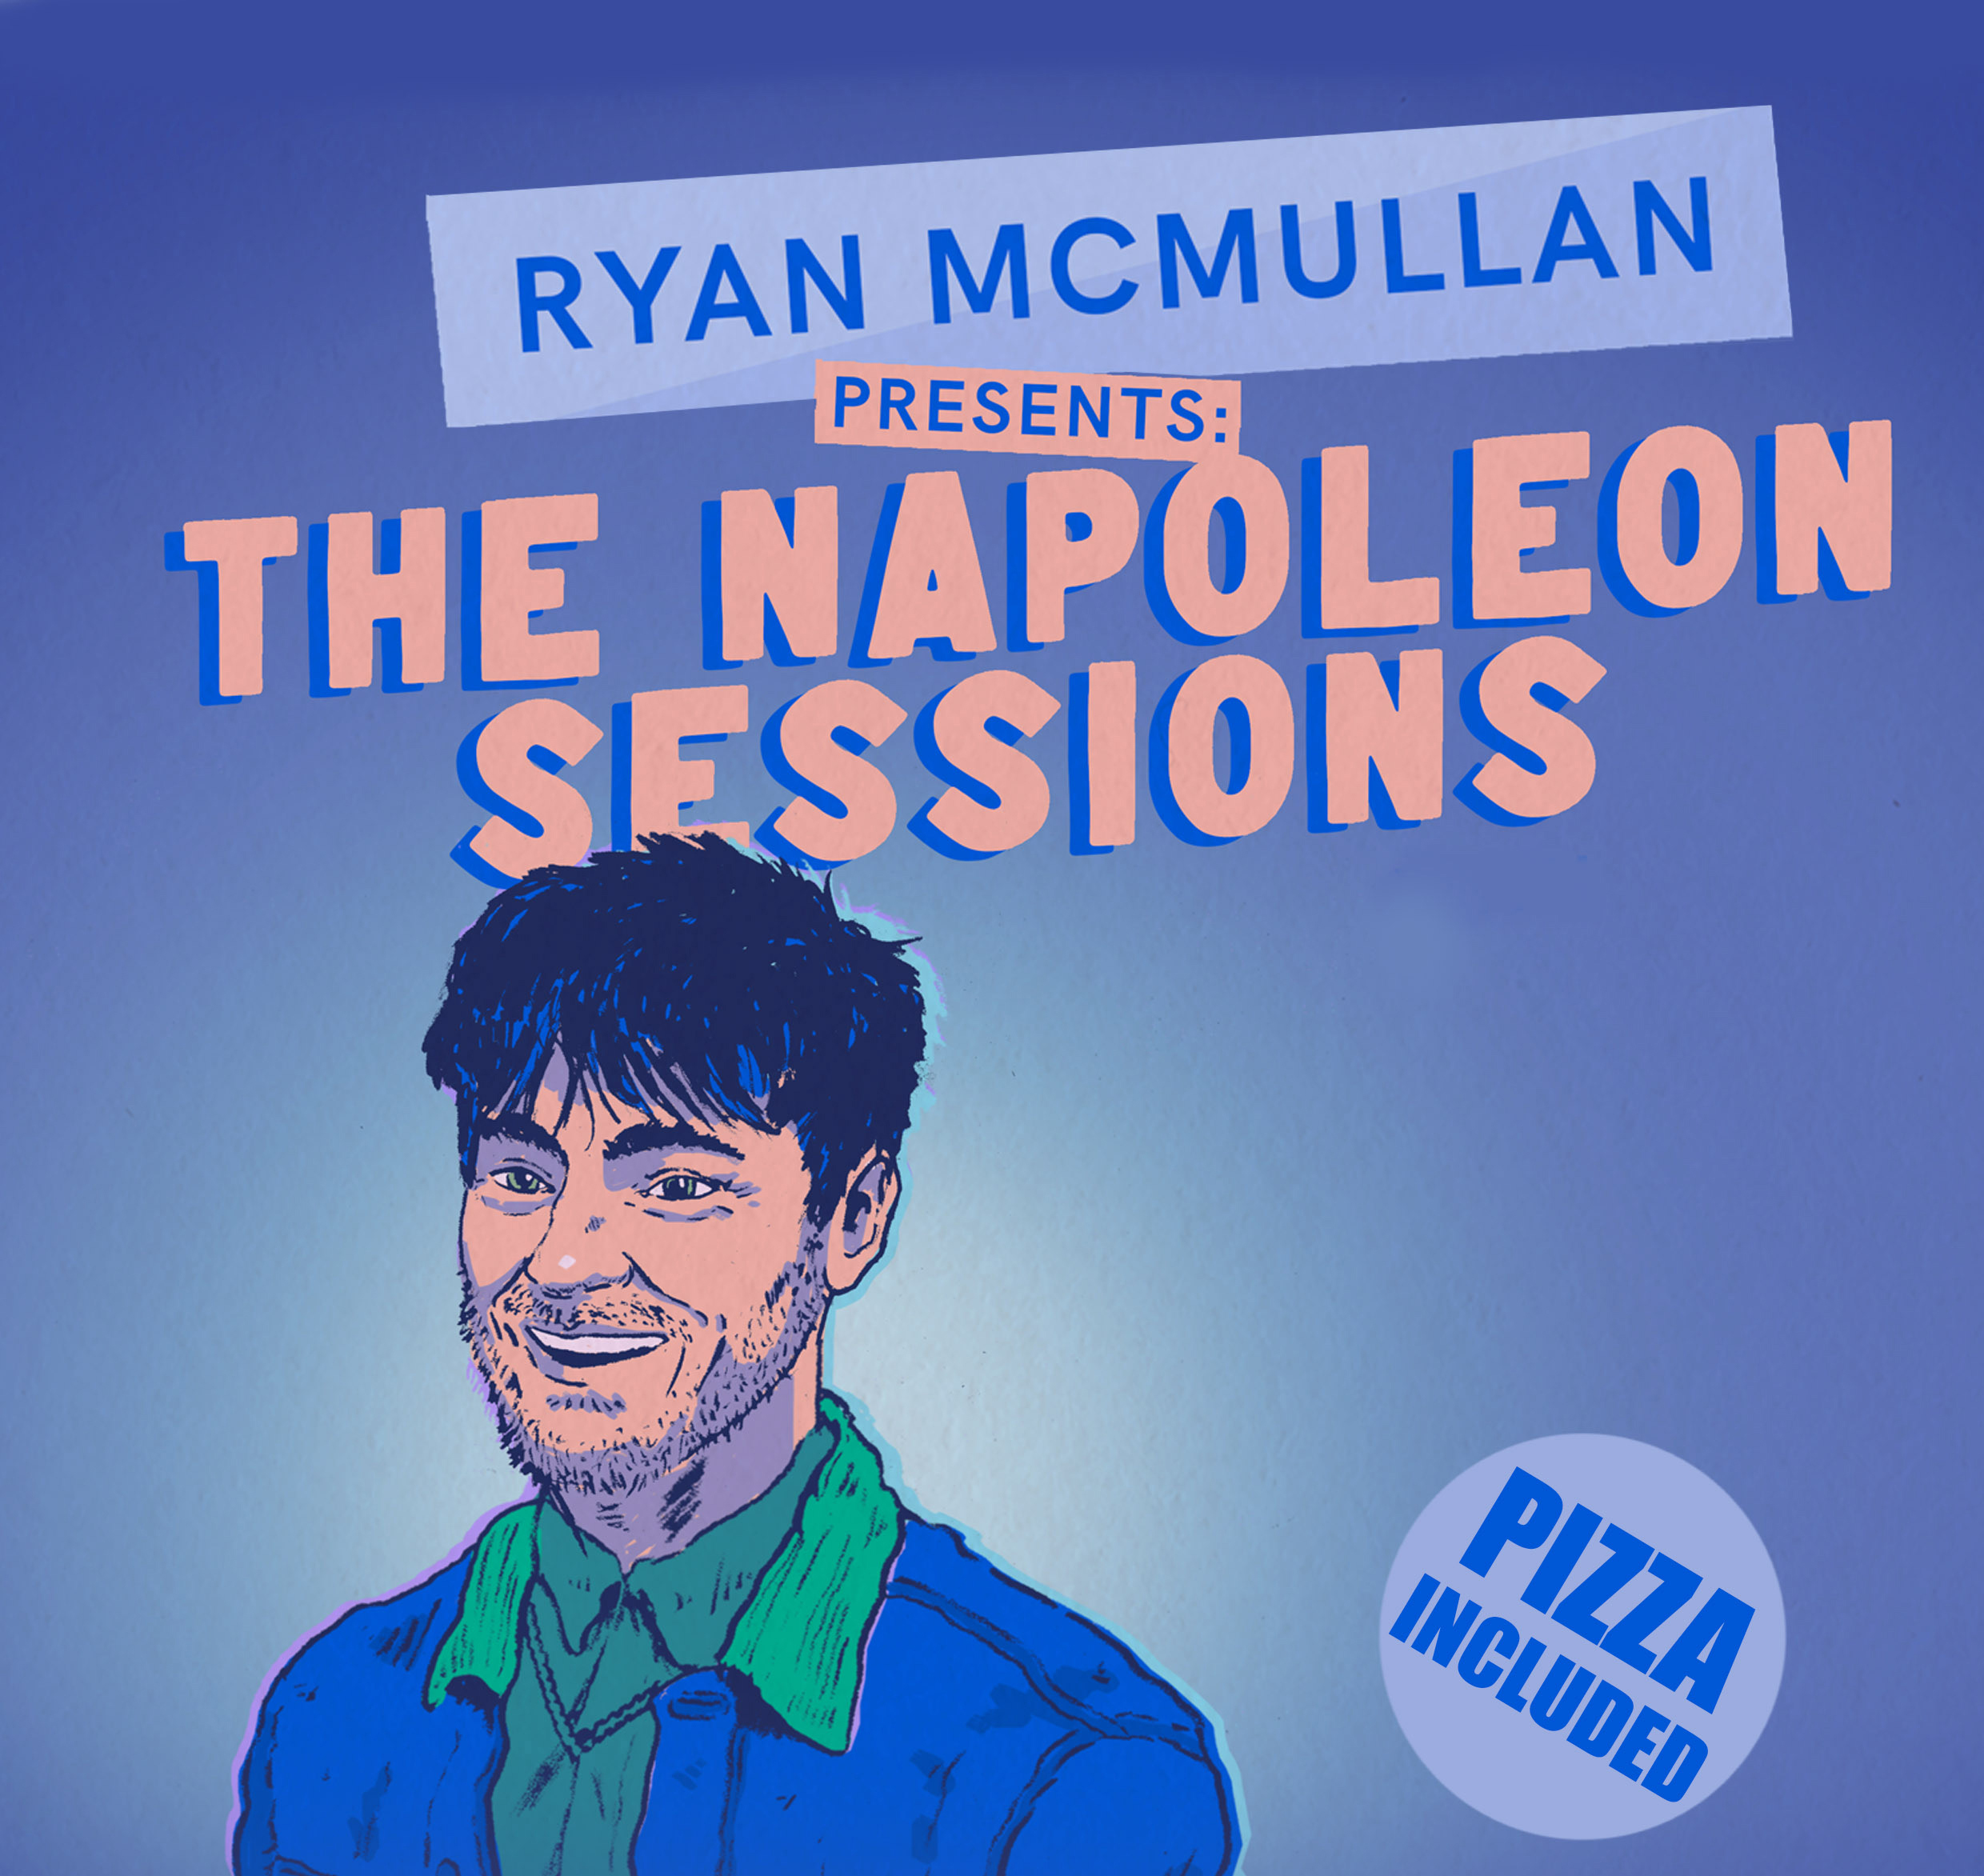 RYAN MCMULLAN presents: The Napoleon Sessions Live at the Limelight! on Saturday 19th September 2020 